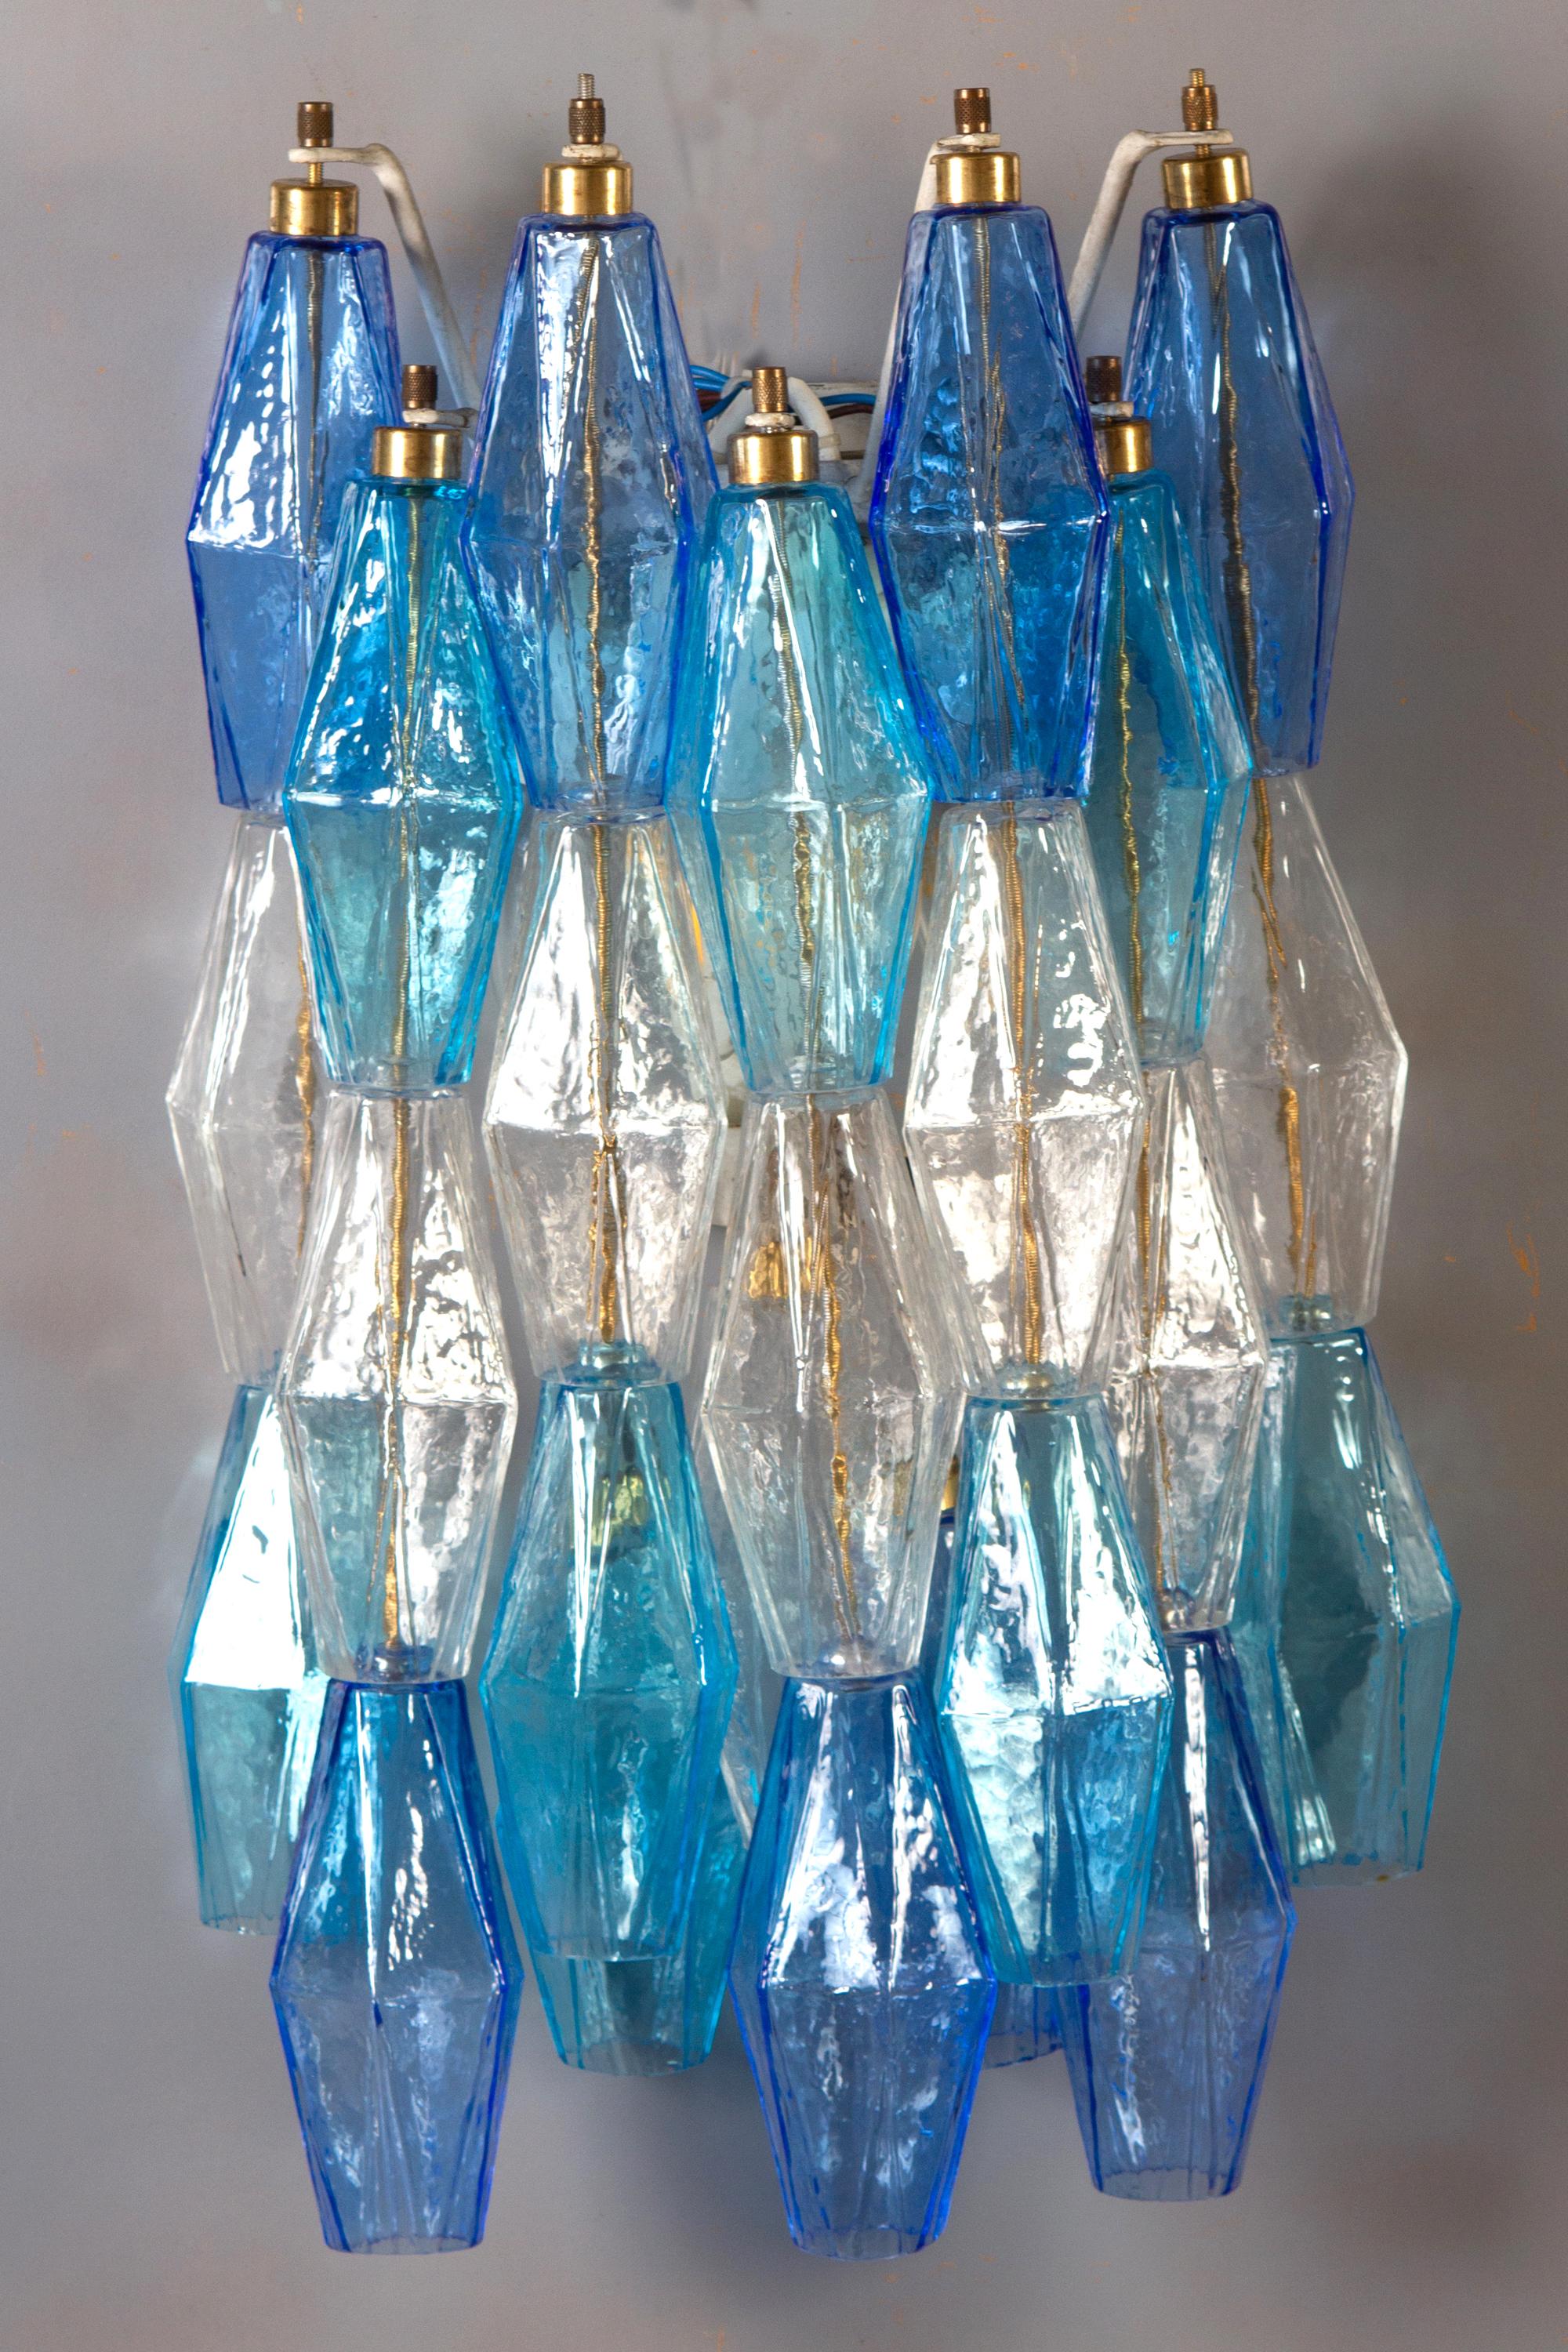 Striking pair of poliedri wall lights. Sapphire color variation with blu and aquamarine precious Poliedri Murano glass.
We can customize the frame, white painted or gold.
Available the pair.
Edition limited from a great master of Venetian